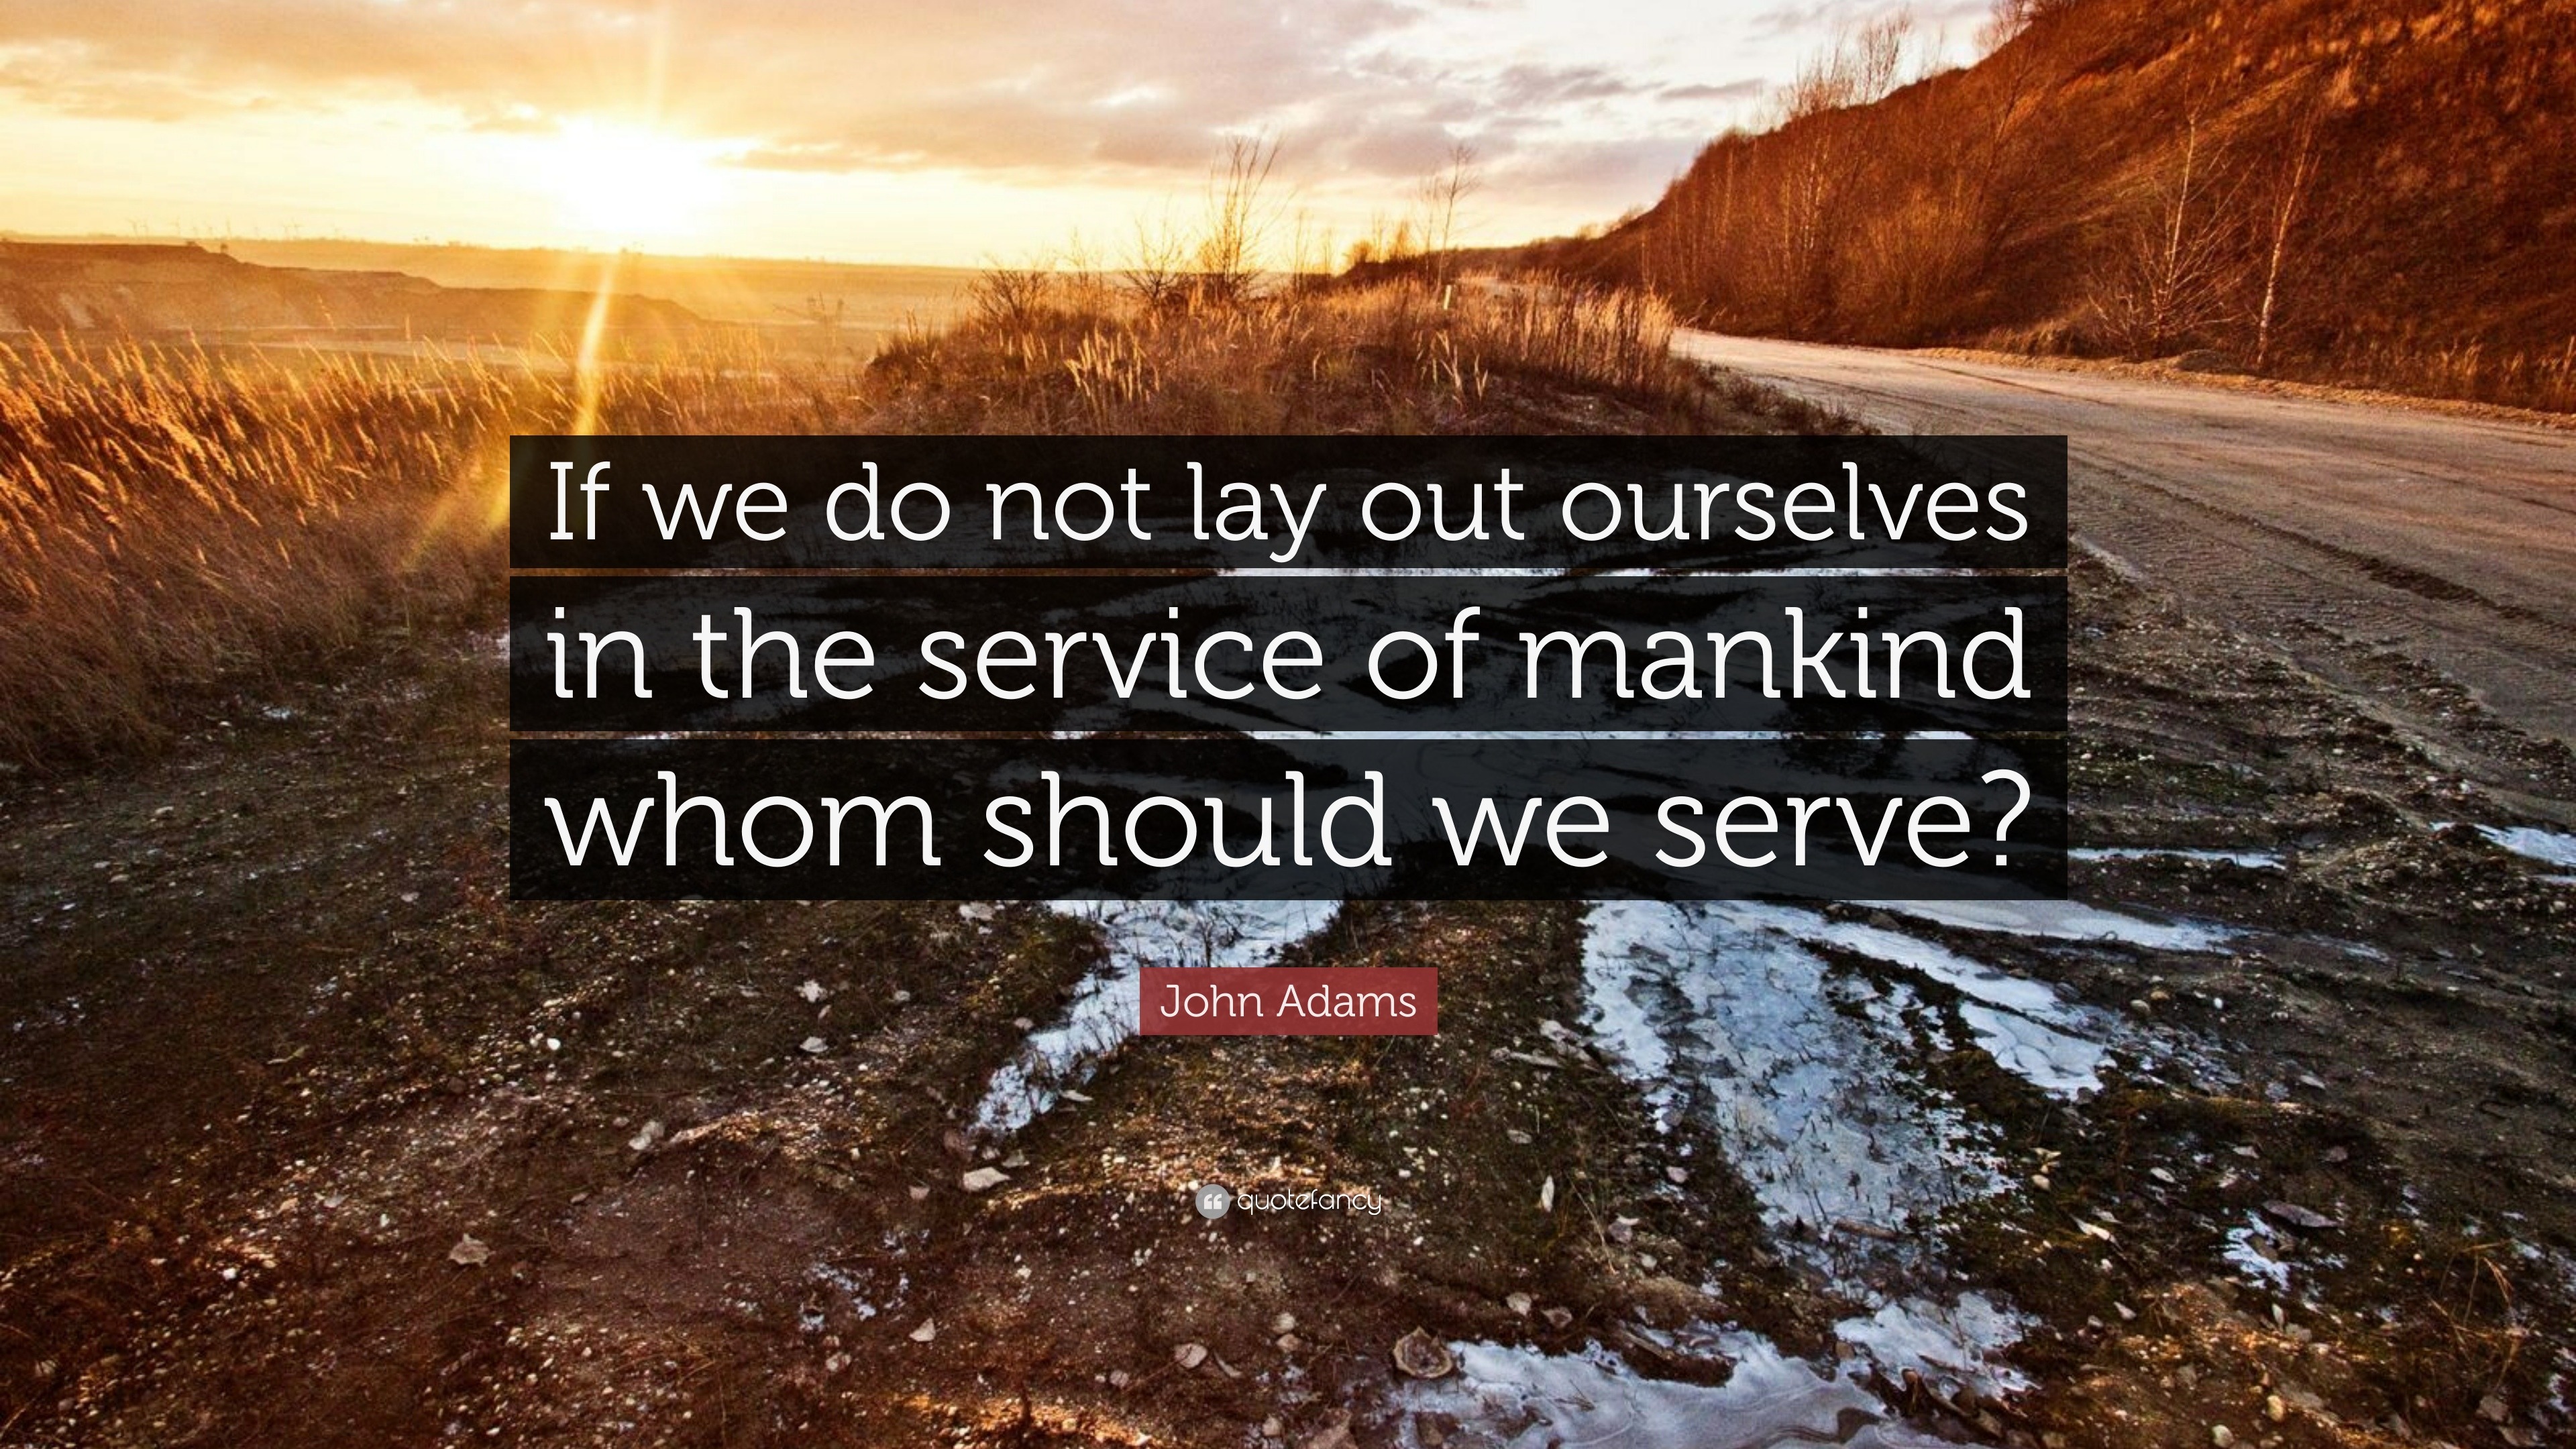 John Adams Quote “If we do not lay out ourselves in the service of